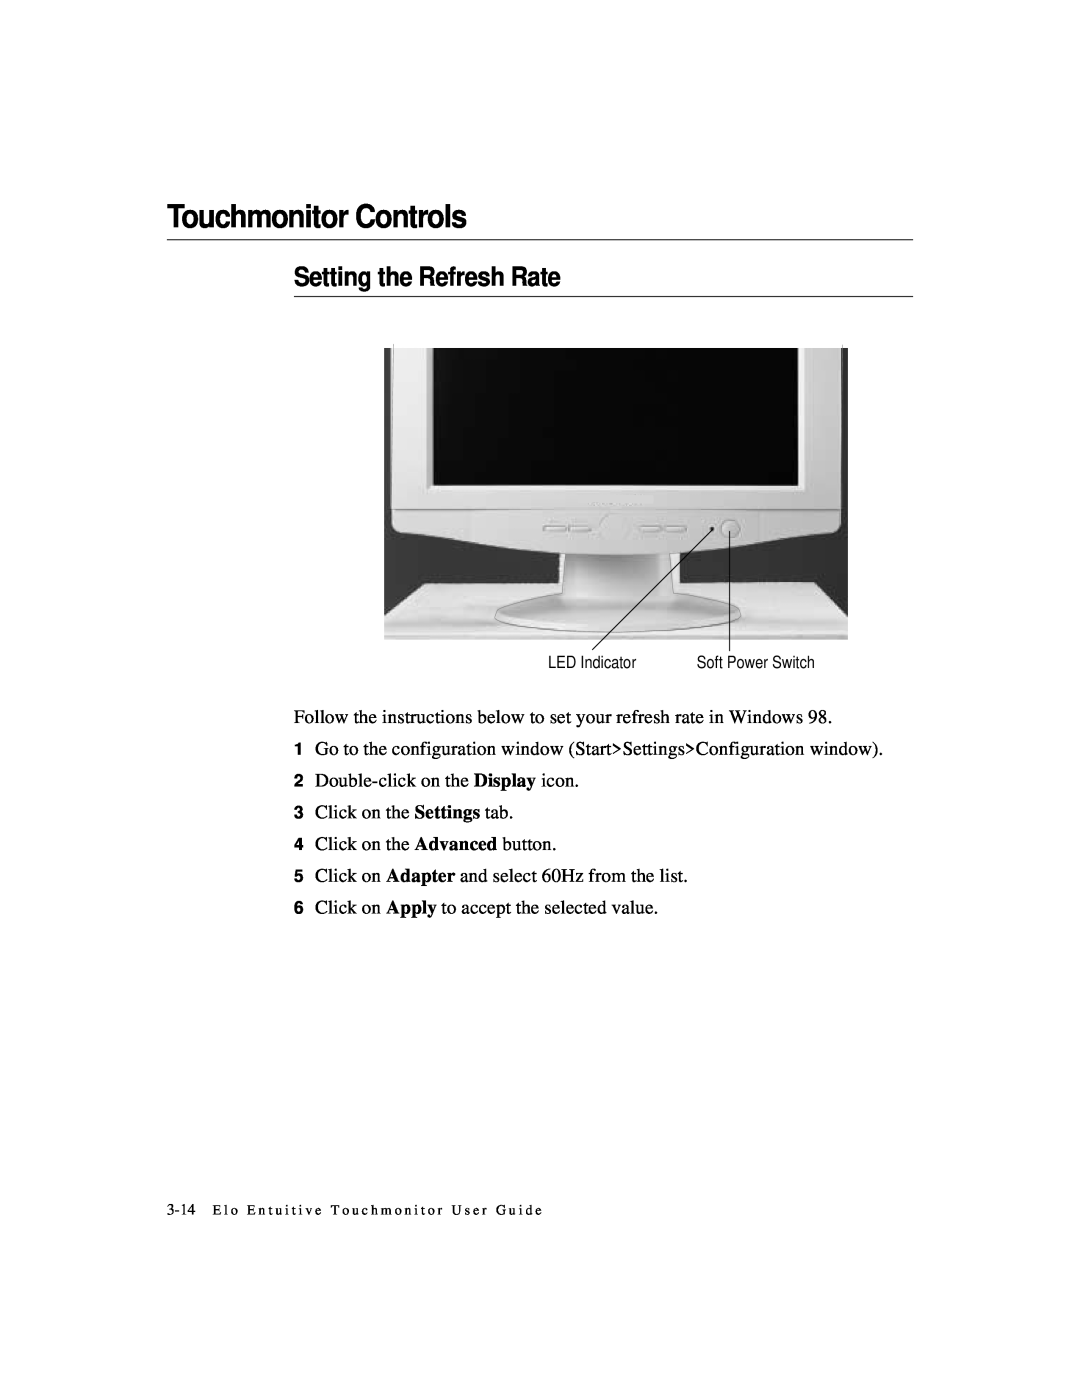 Elo TouchSystems ET1724L-7SWR-1-NL, ET1724L-8SWR-1-NL manual Touchmonitor Controls, Setting the Refresh Rate 